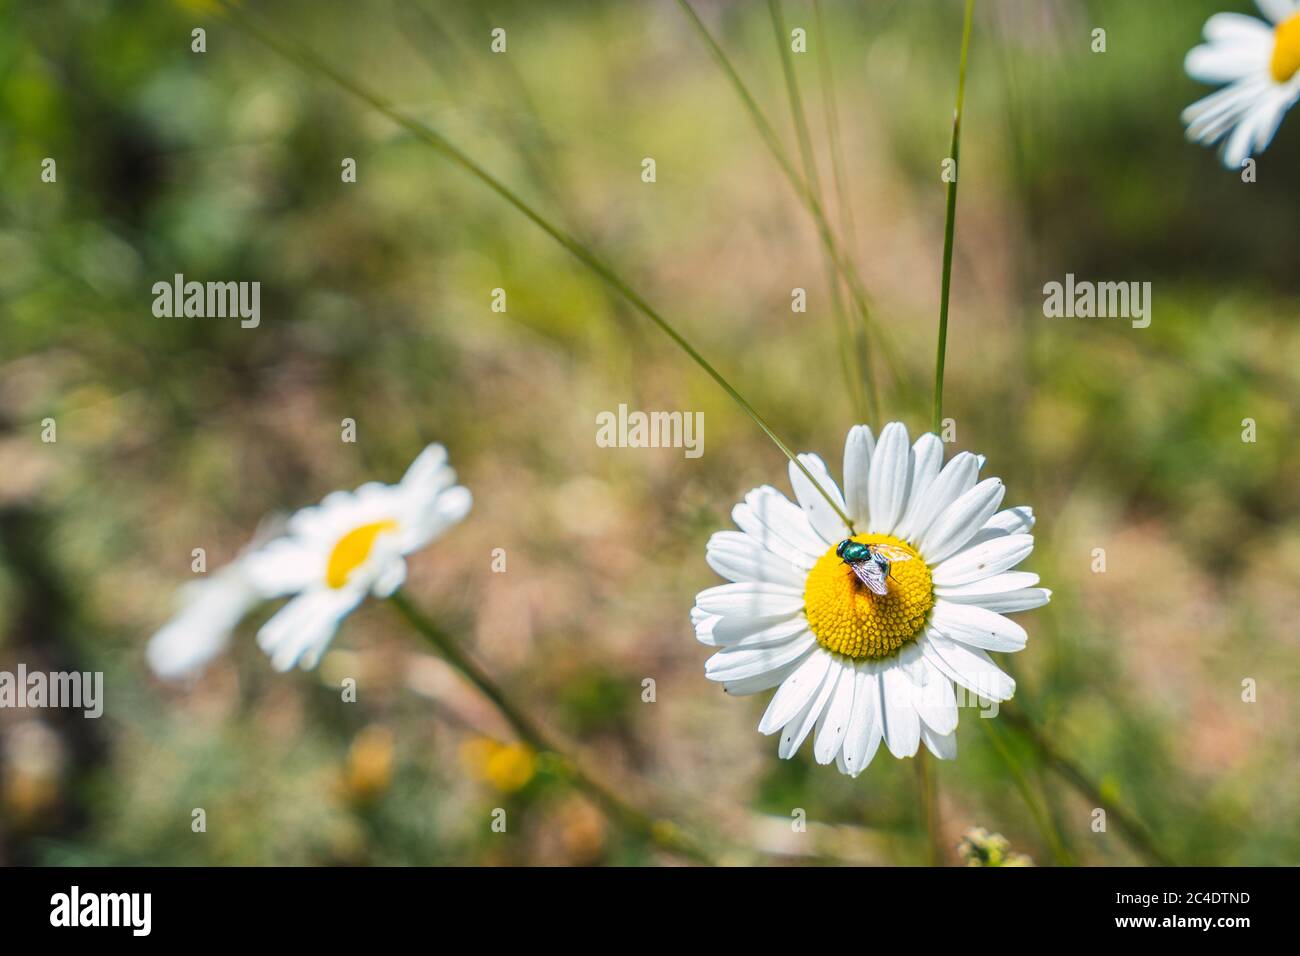 Daisy flower with green fly Phaenicia sericata on a meadow in the Pyrenees mountains Stock Photo